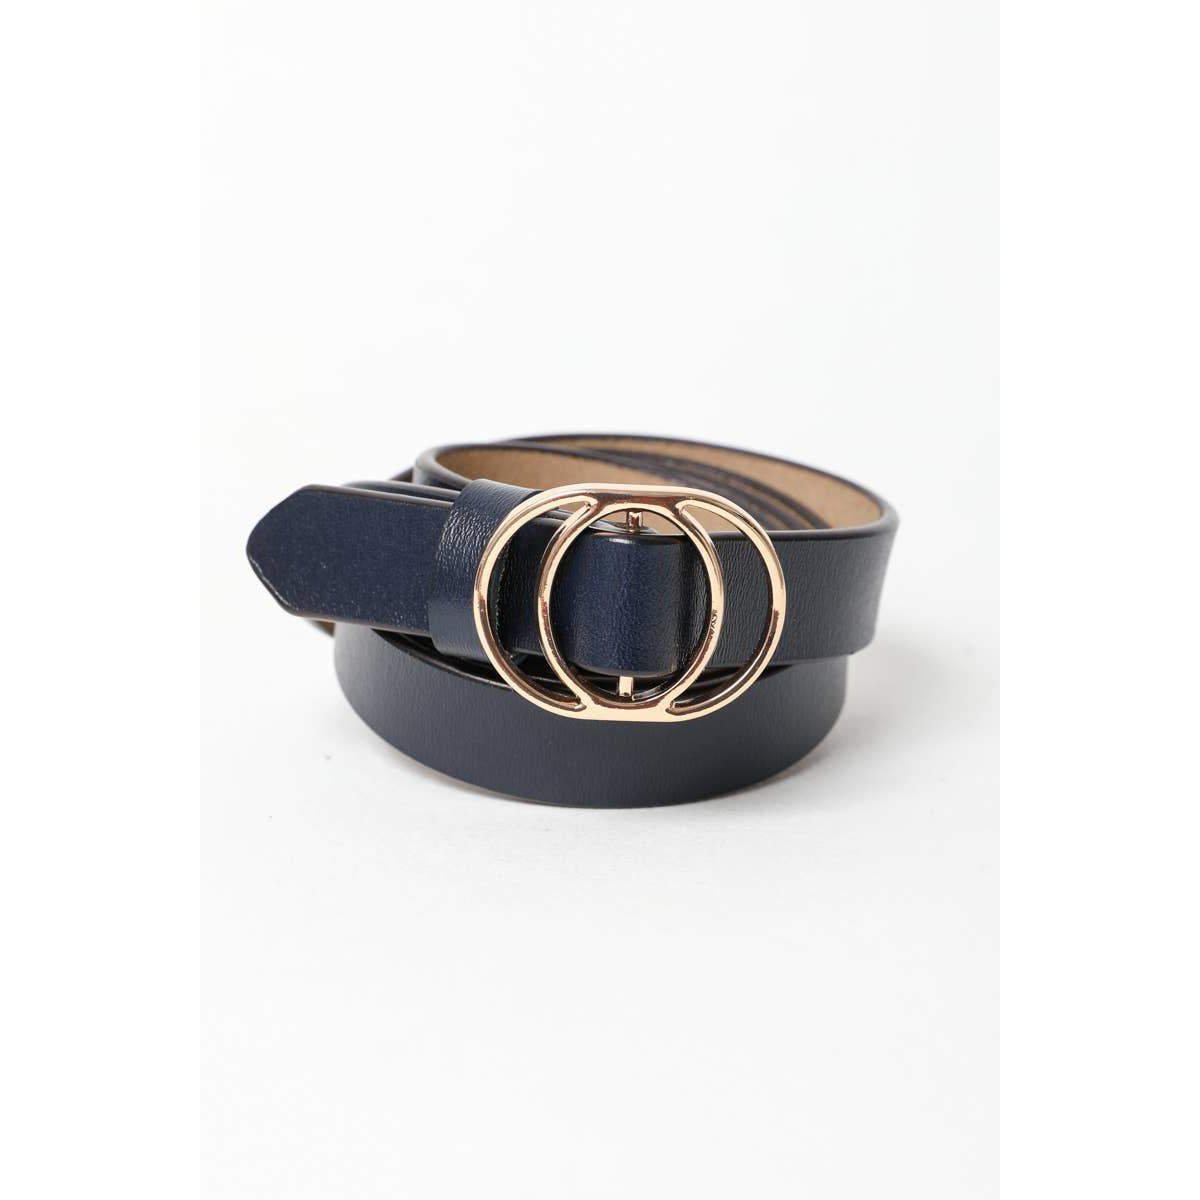 The Lair Oval Buckle Belt Brass